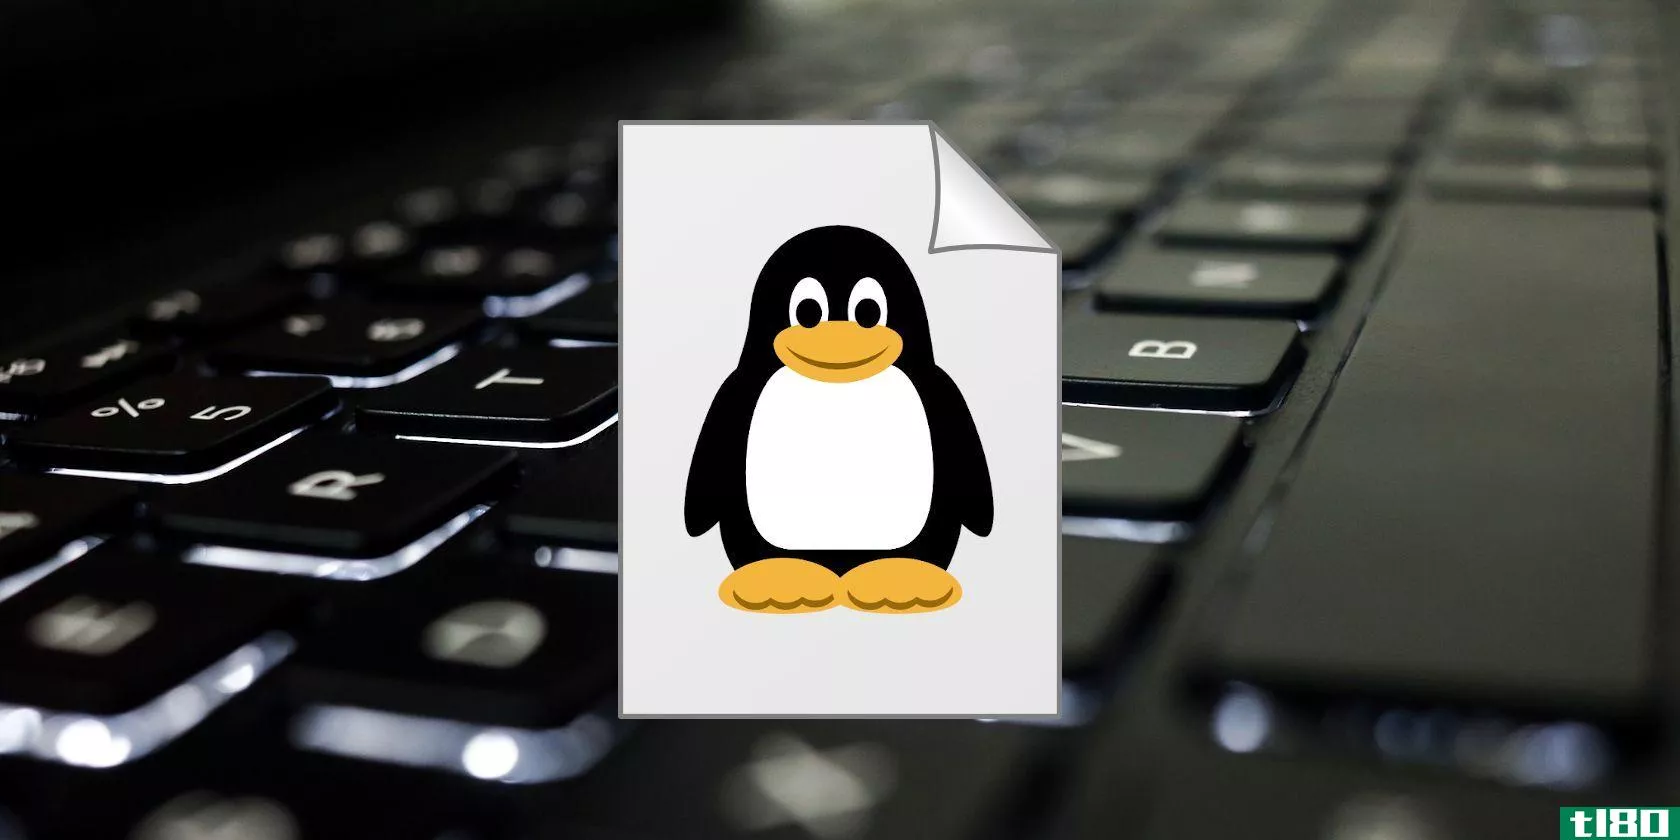 Creating a New File in Linux